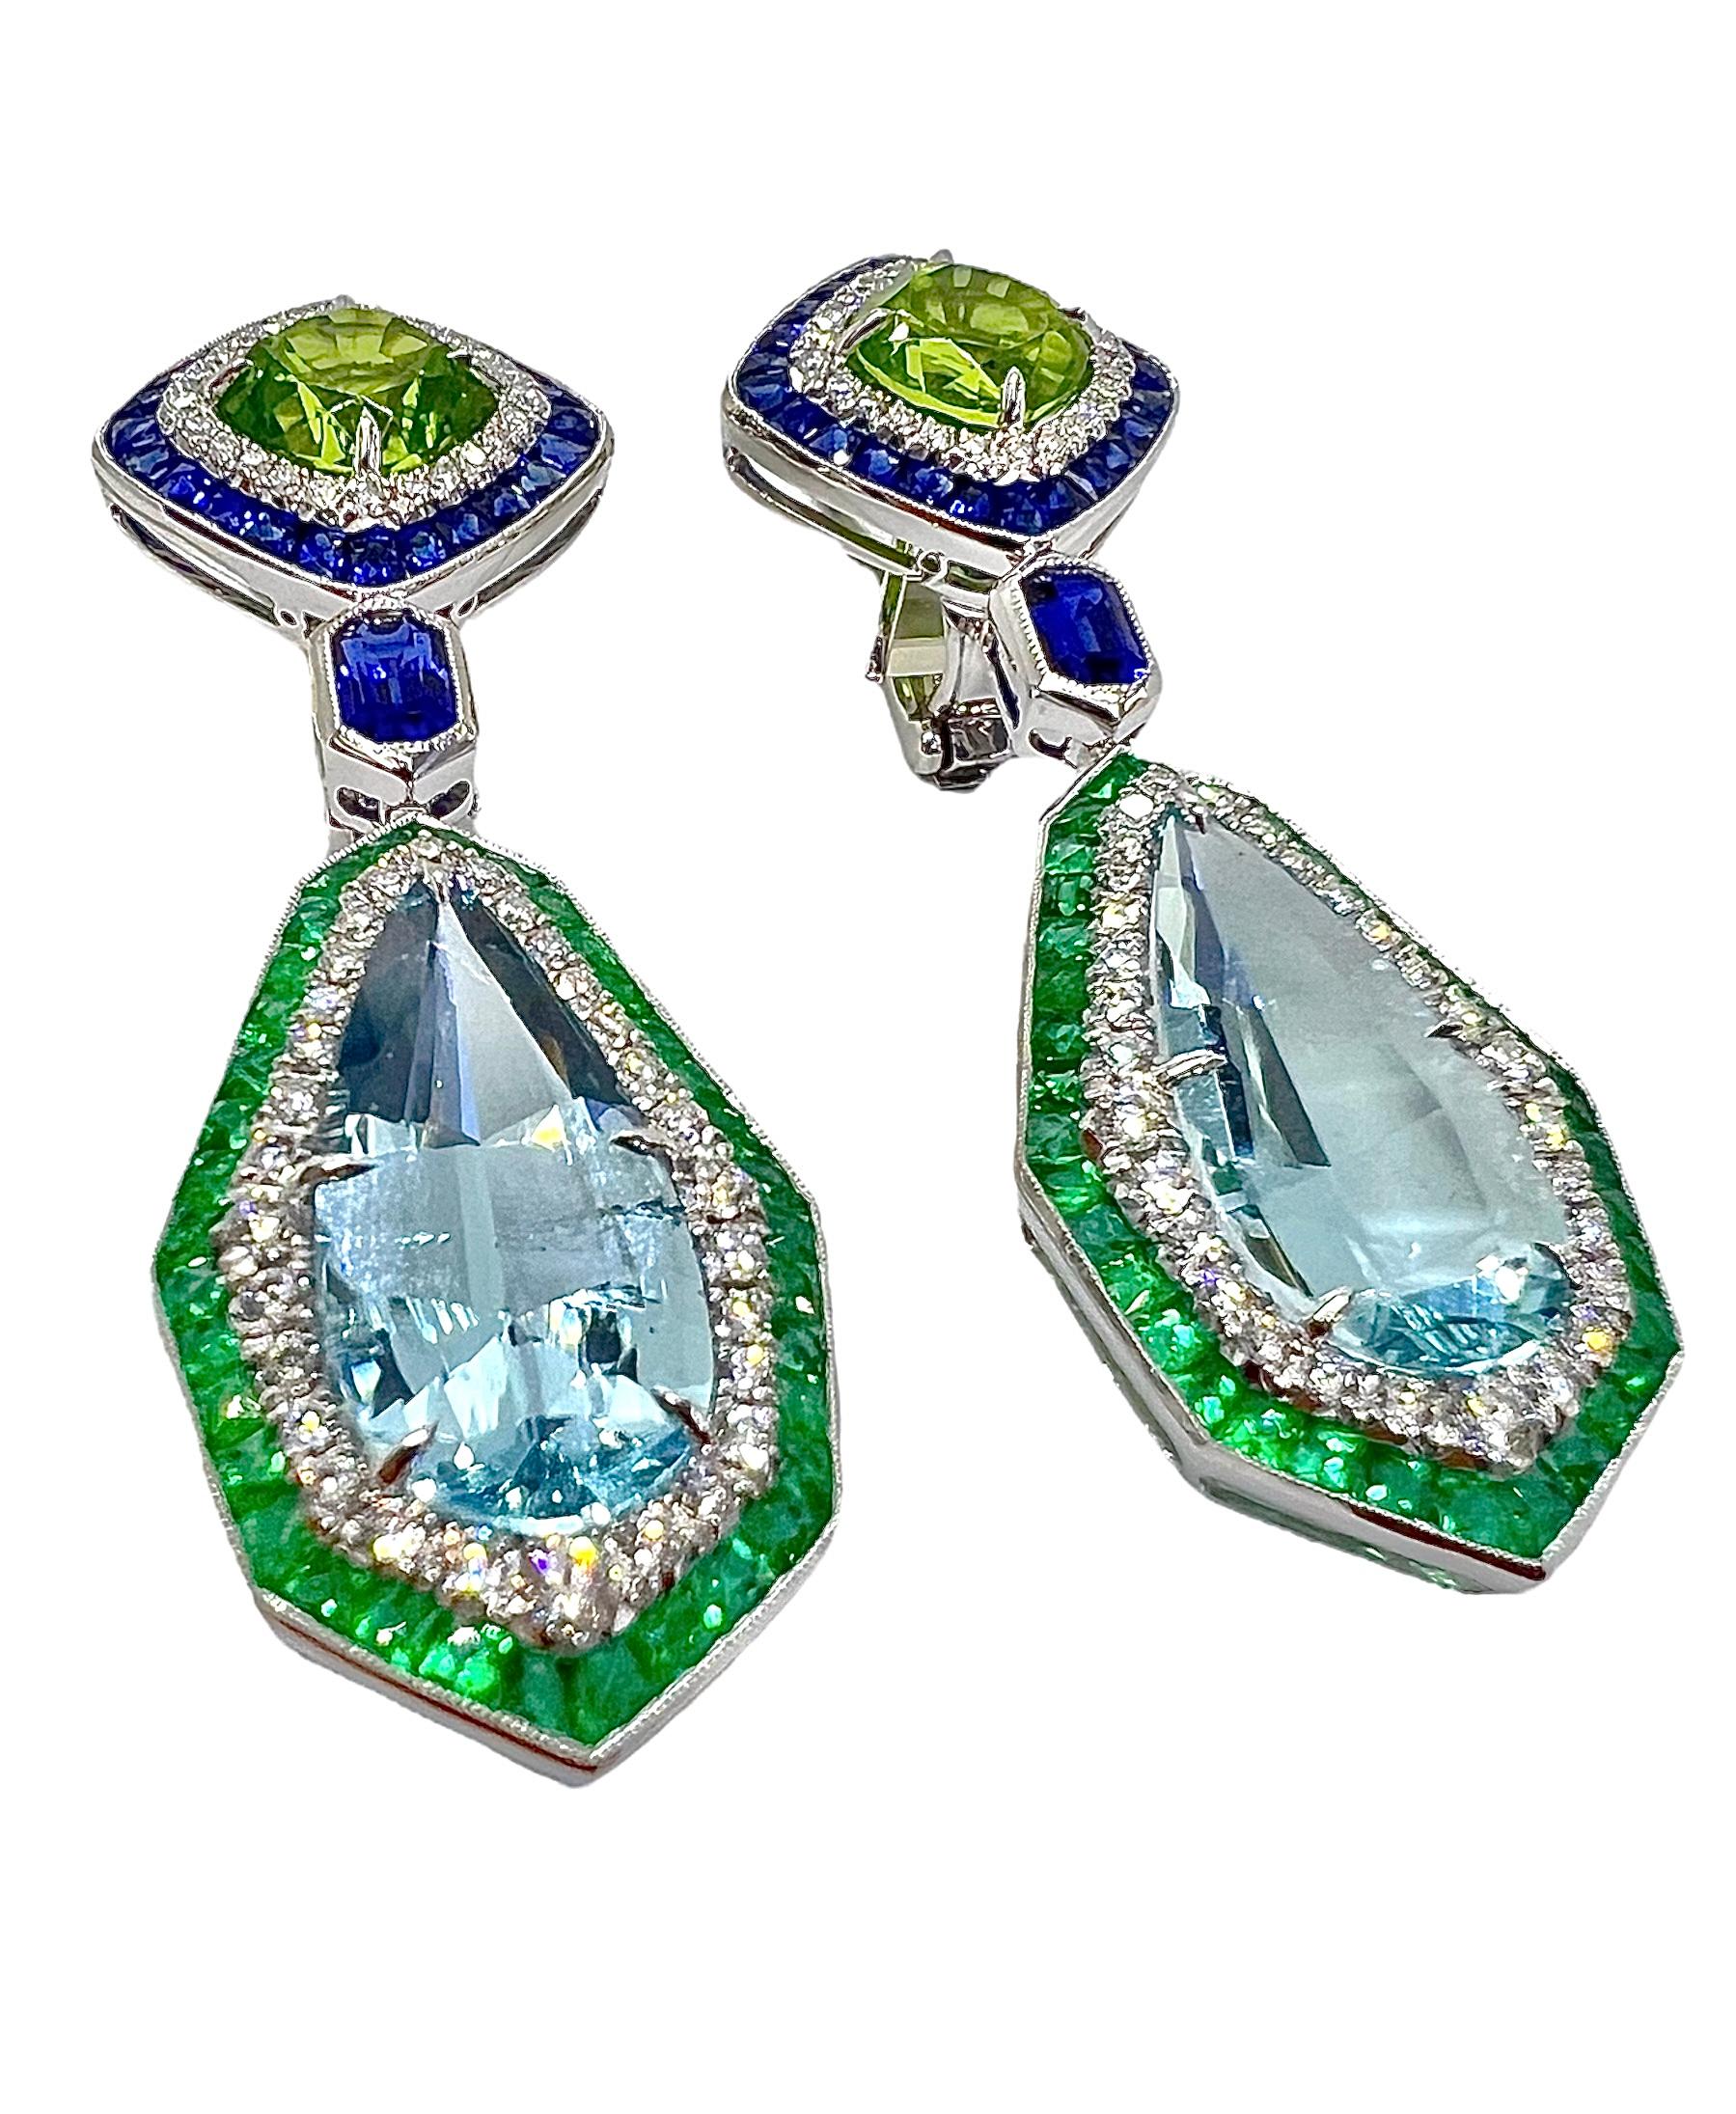 Platinum earrings with 8.60 carat aquamarine, 7.43 carat peridot, 3.68 carat diamond and 1.42 carat blue sapphire.

Sophia D by Joseph Dardashti LTD has been known worldwide for 35 years and are inspired by classic Art Deco design that merges with